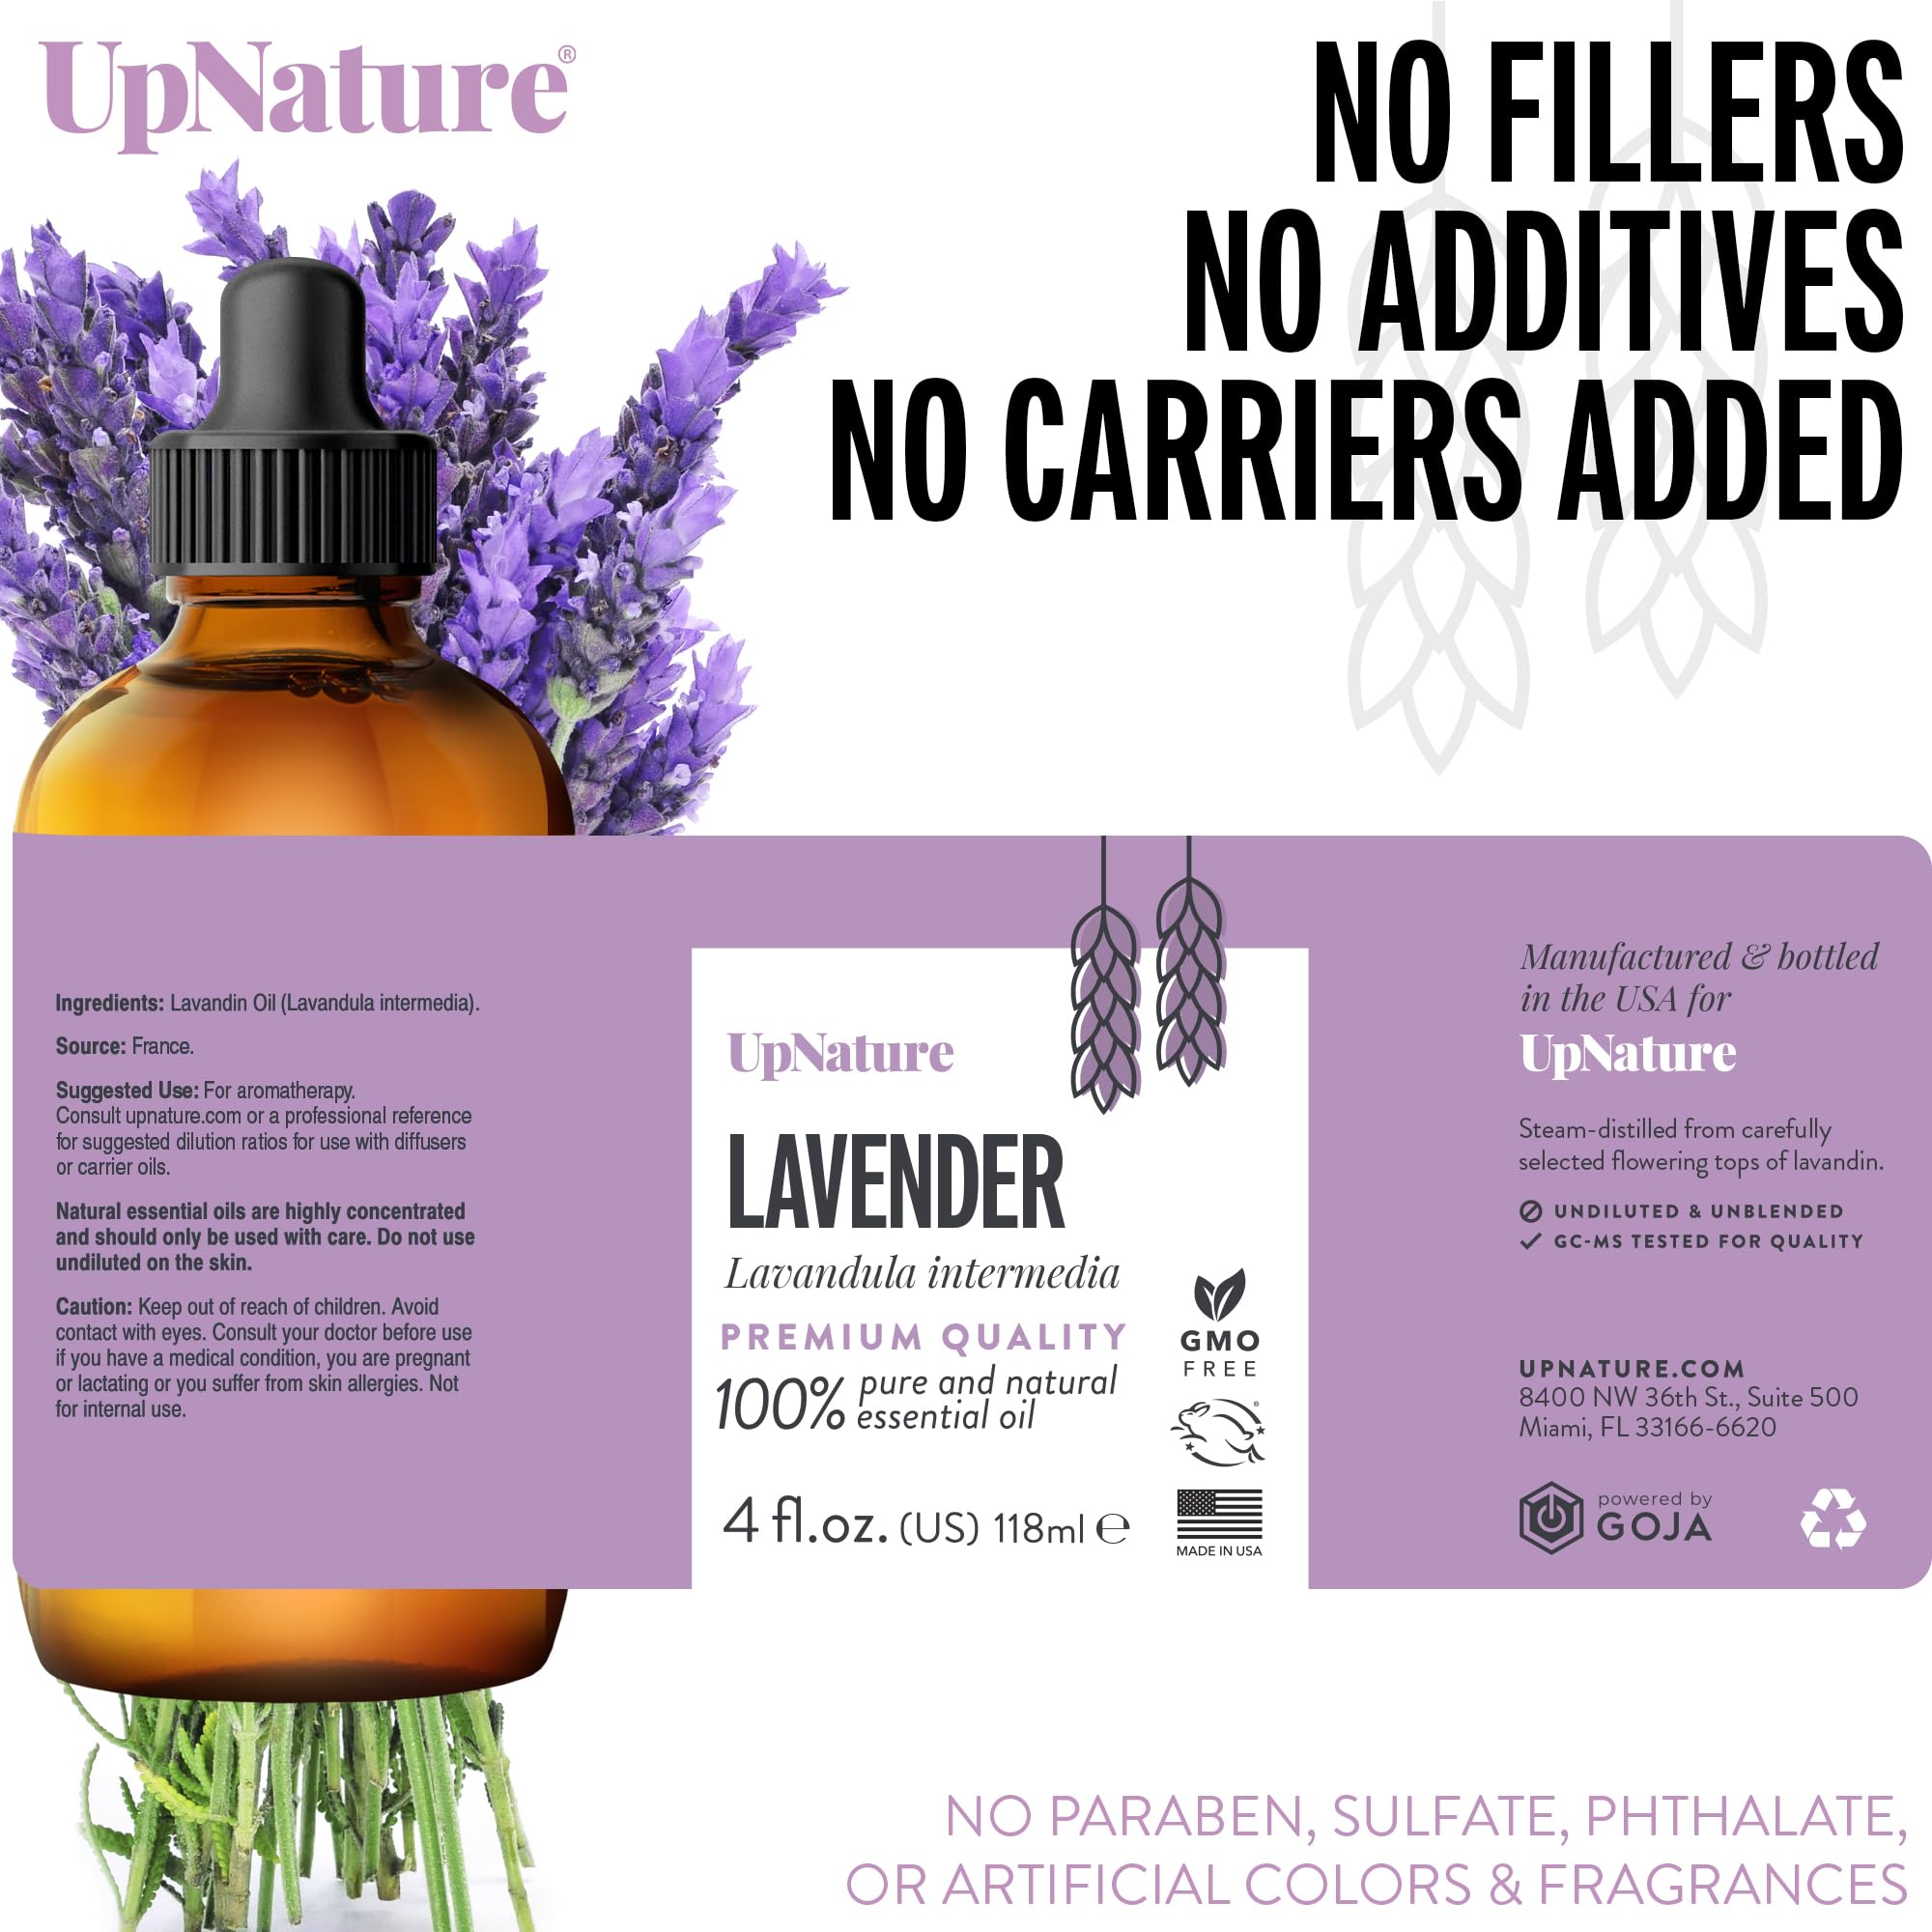 UpNature Lavender Essential Oil Pure - 100% Natural & Pure Lavender Oil - Essential Oils for Diffuser - Diffuser Oil for Aromatherapy - Get Better Sleep - Massage